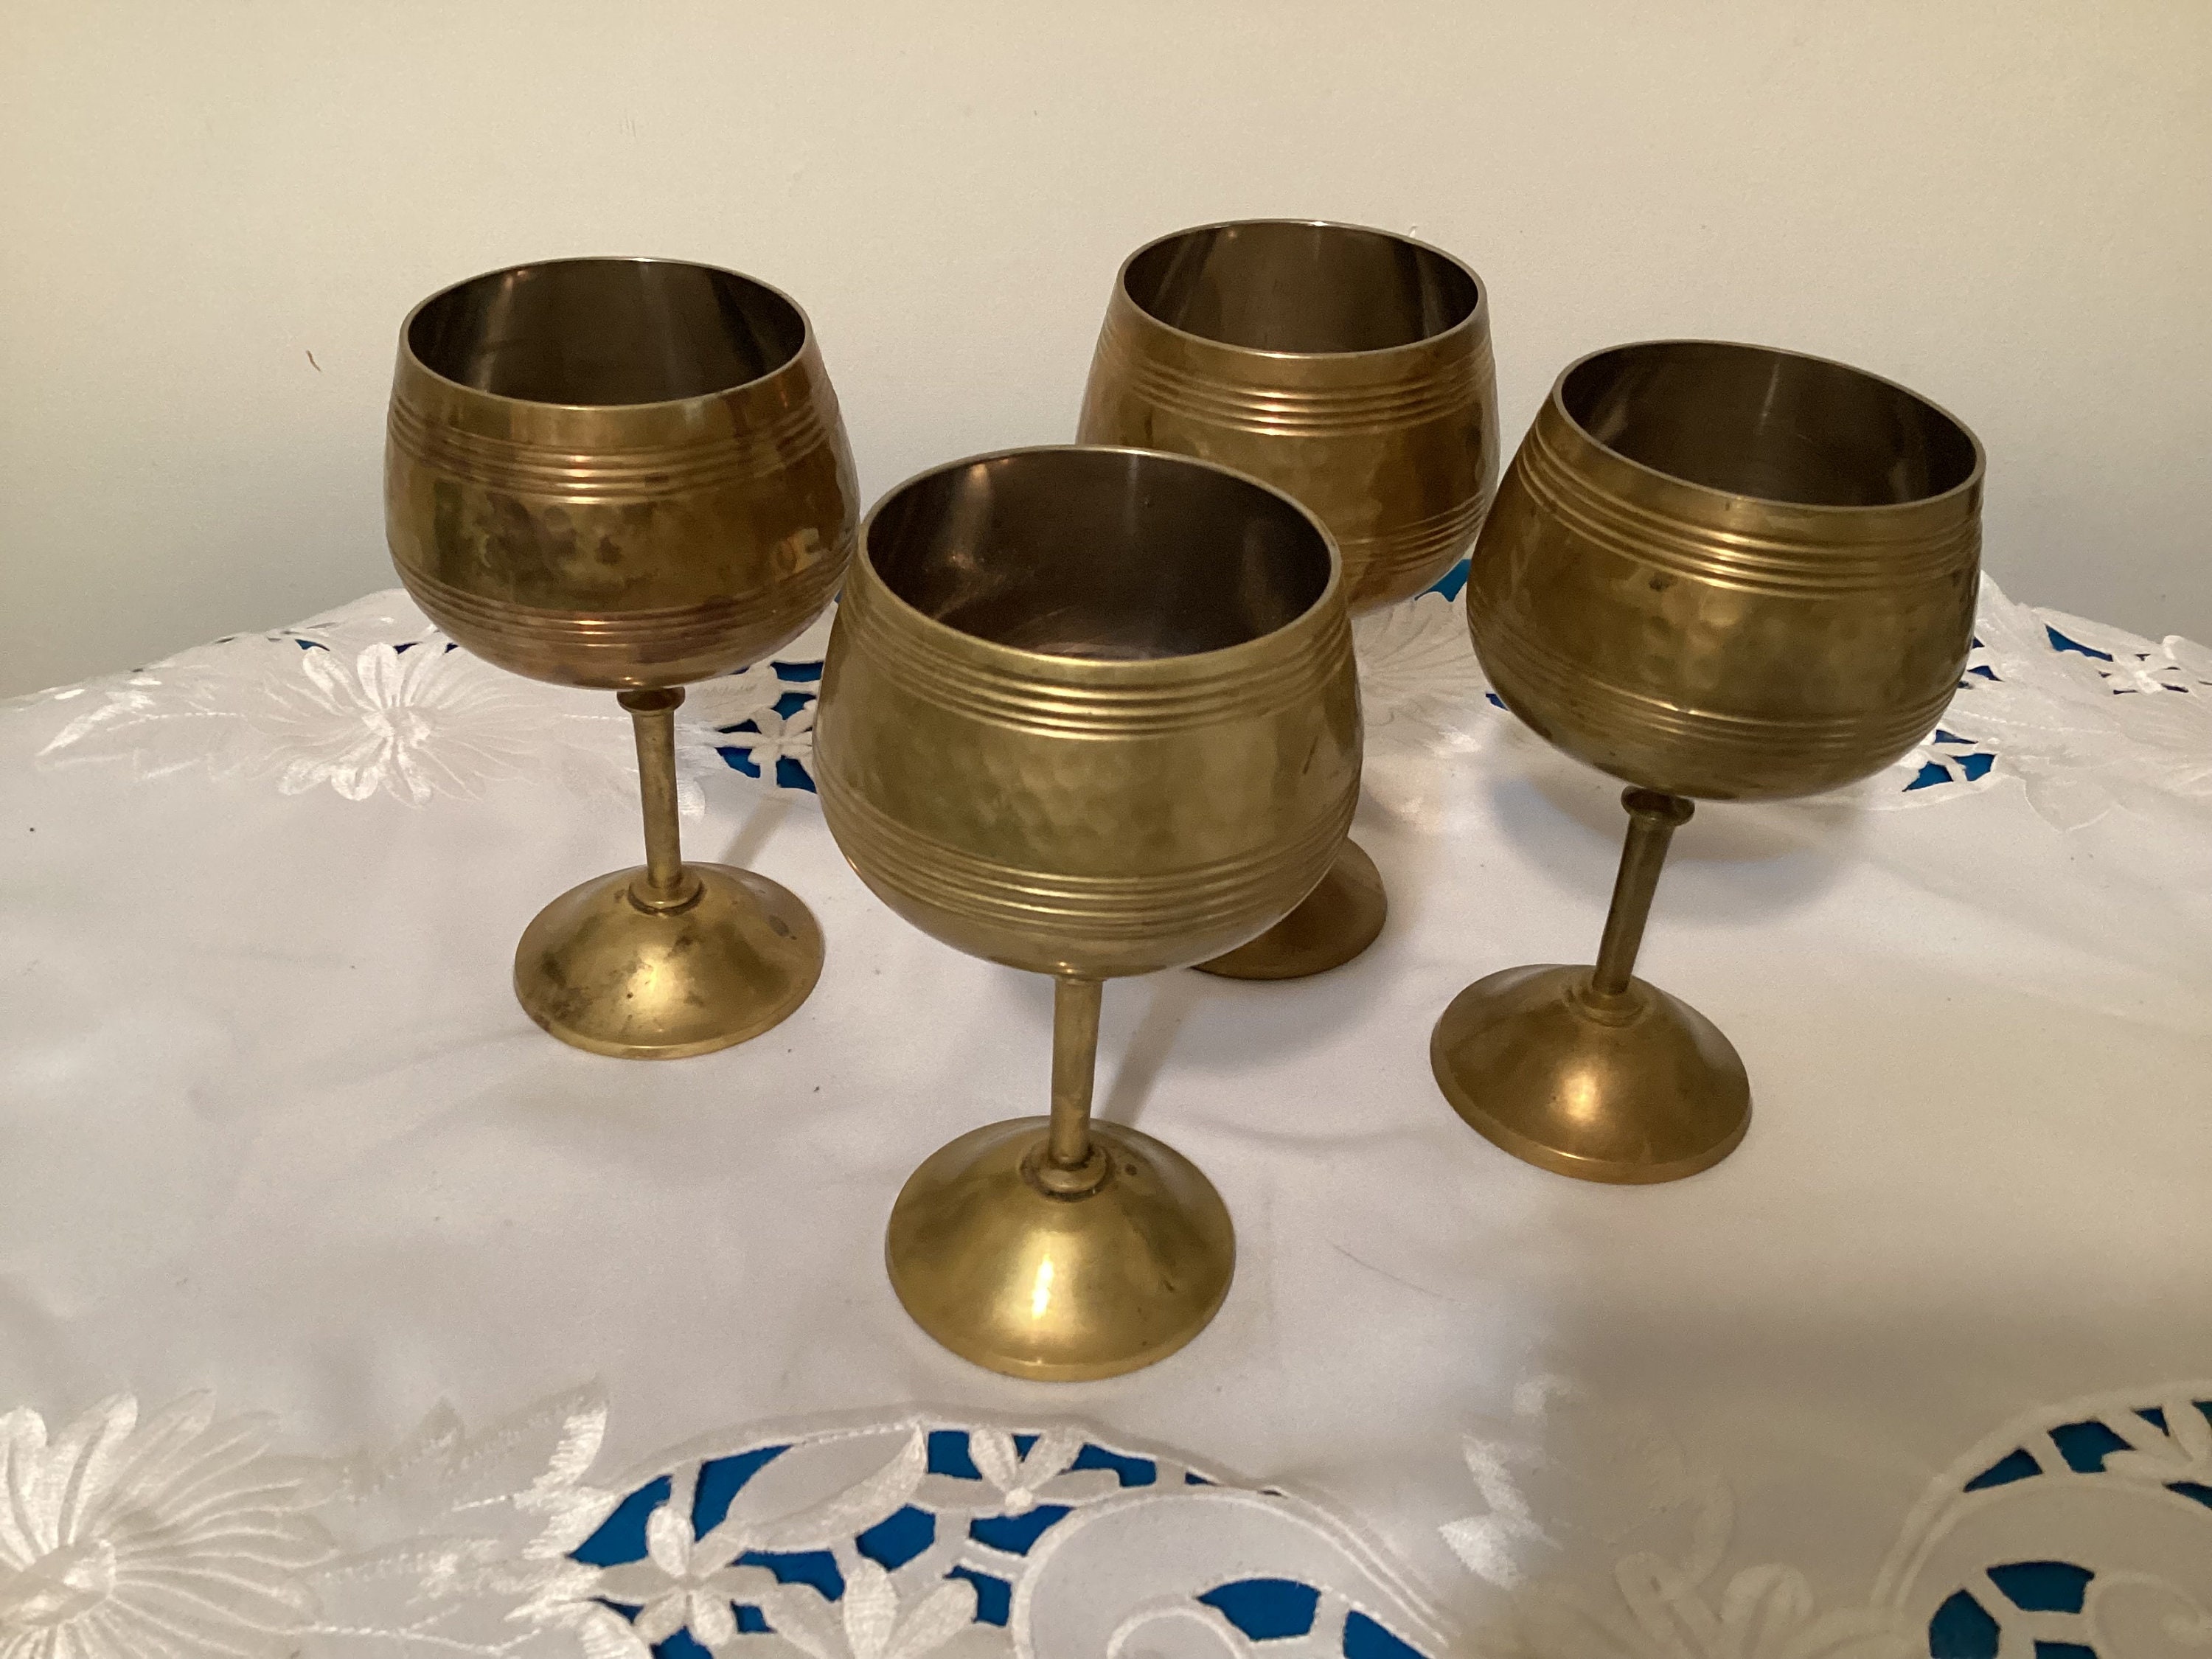 2 Vintage Brass Wine Goblets w/Silver Interior Lining 6 Tall Made In India